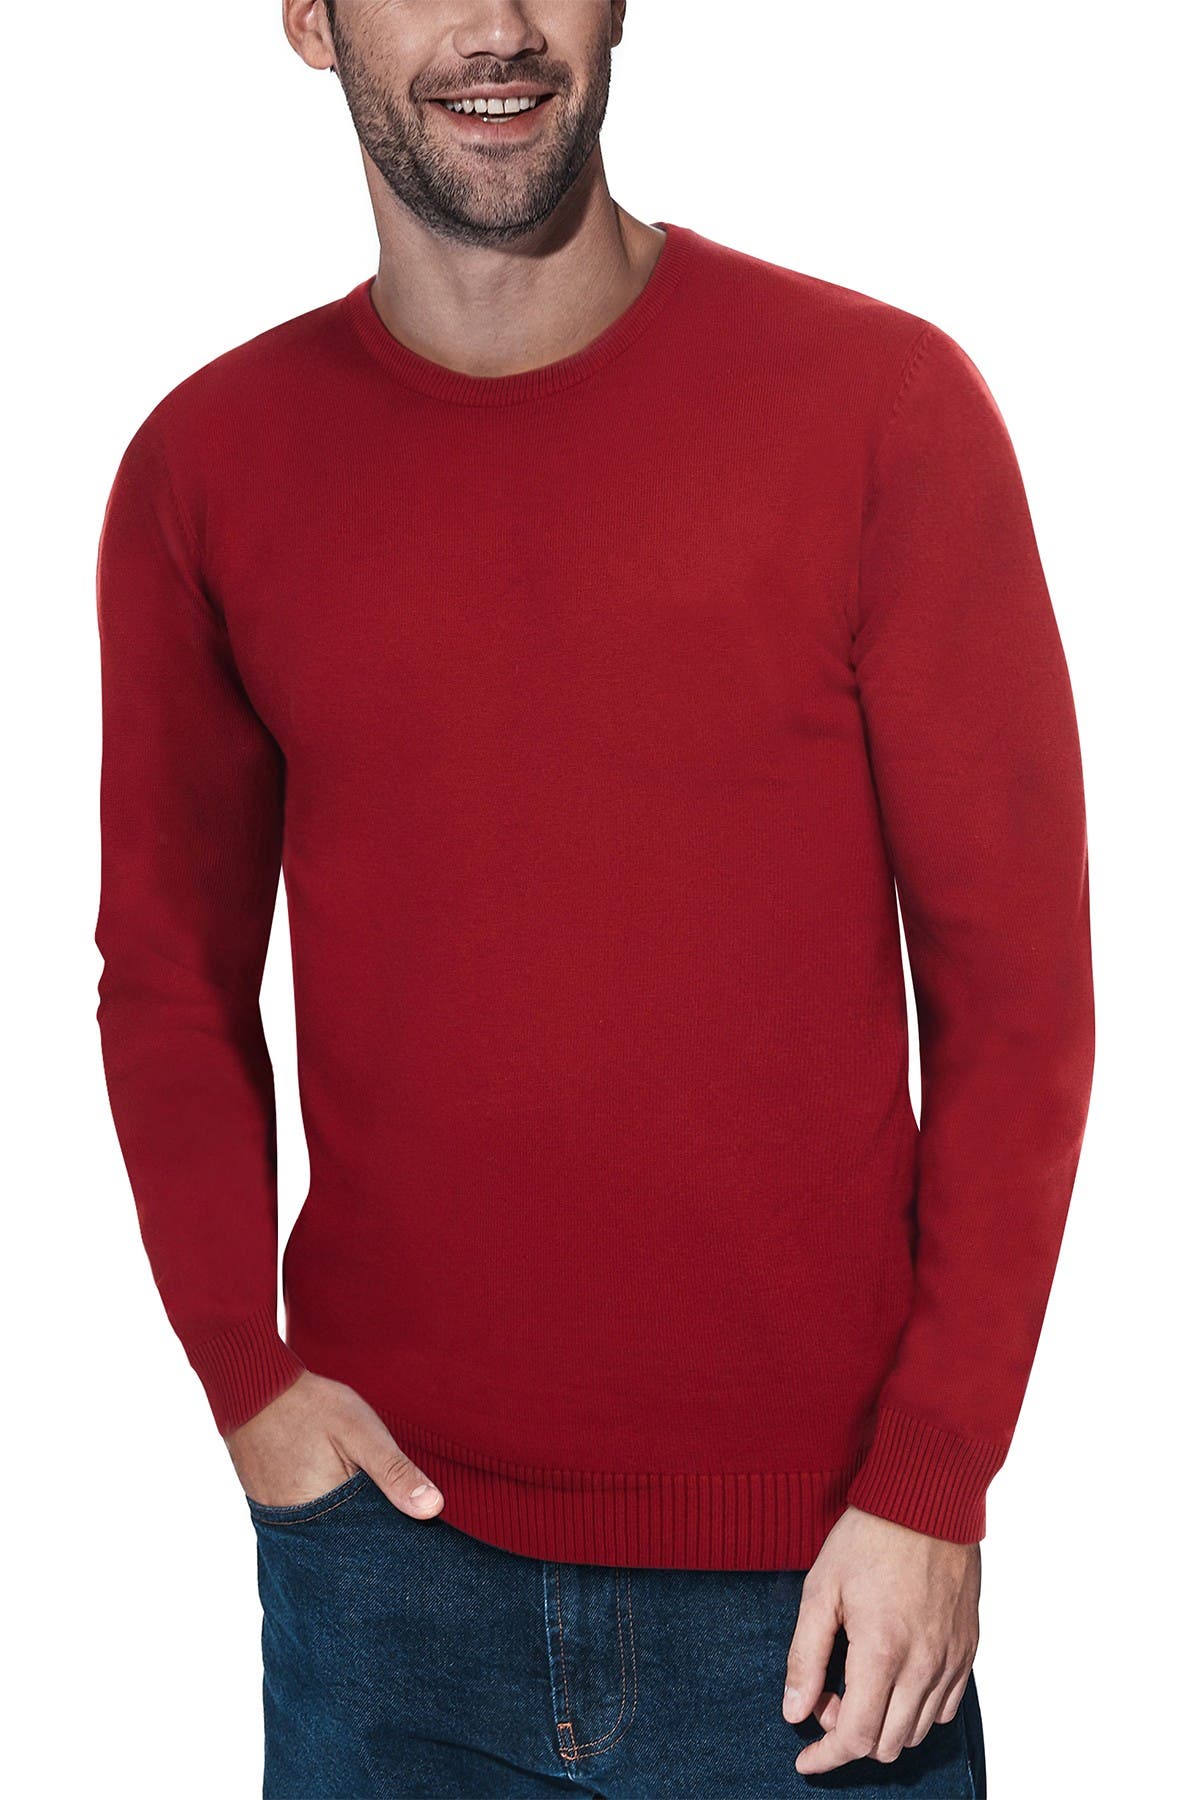 Coolred-Men Crewneck Knit Jumper Casual Assorted Colors Pullover Sweater 